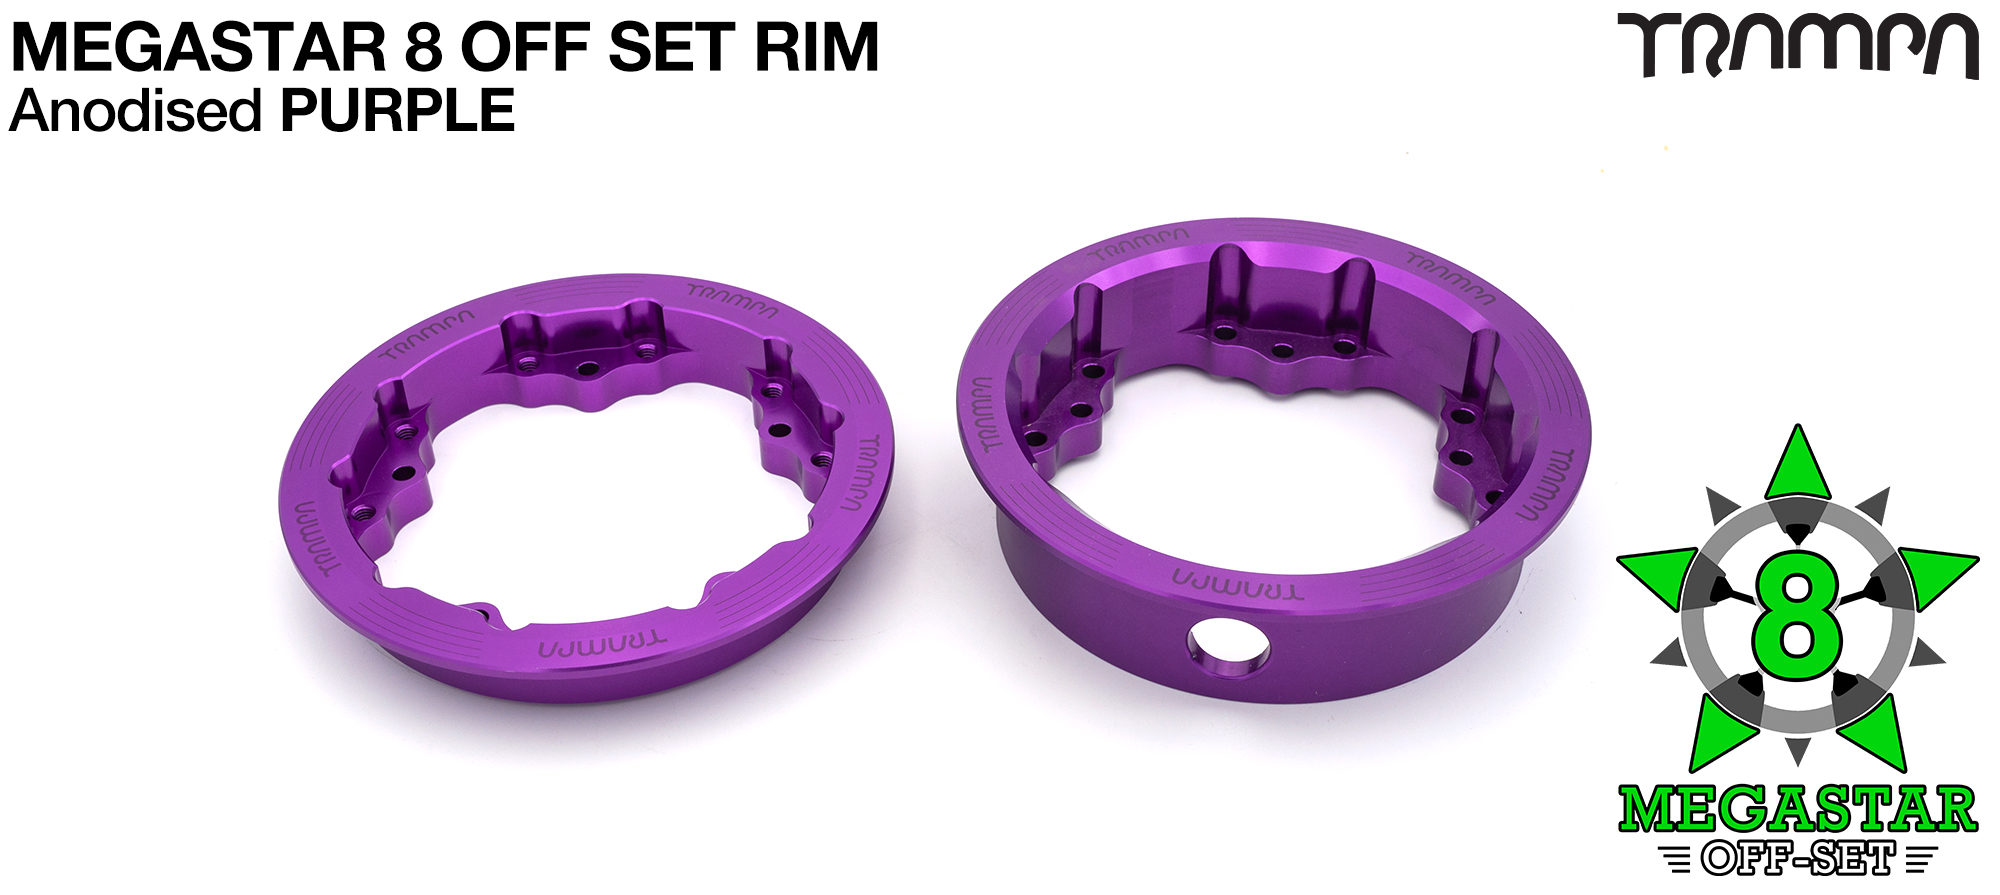 MEGASTAR 8 OS Rims Measure 3.75 x 2 Inch. The bearings are positioned OFF-SET widening the wheel base & accept all 3.75 Rim Tyres - PURPLE 